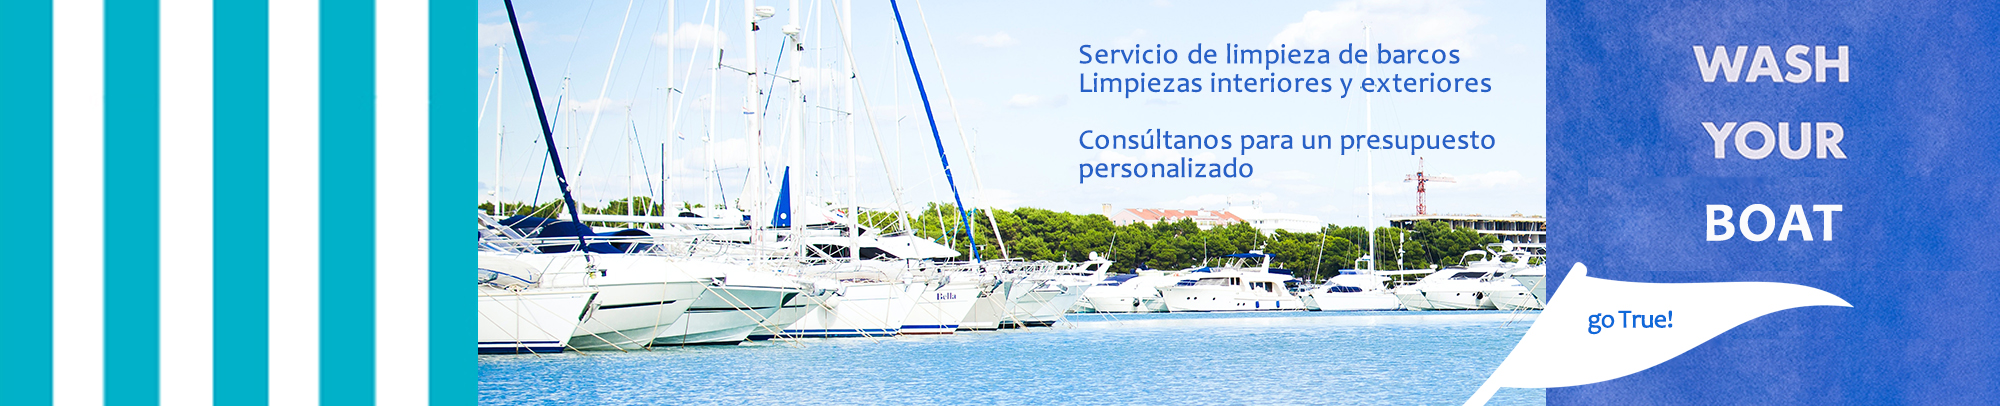 Boat cleaning service